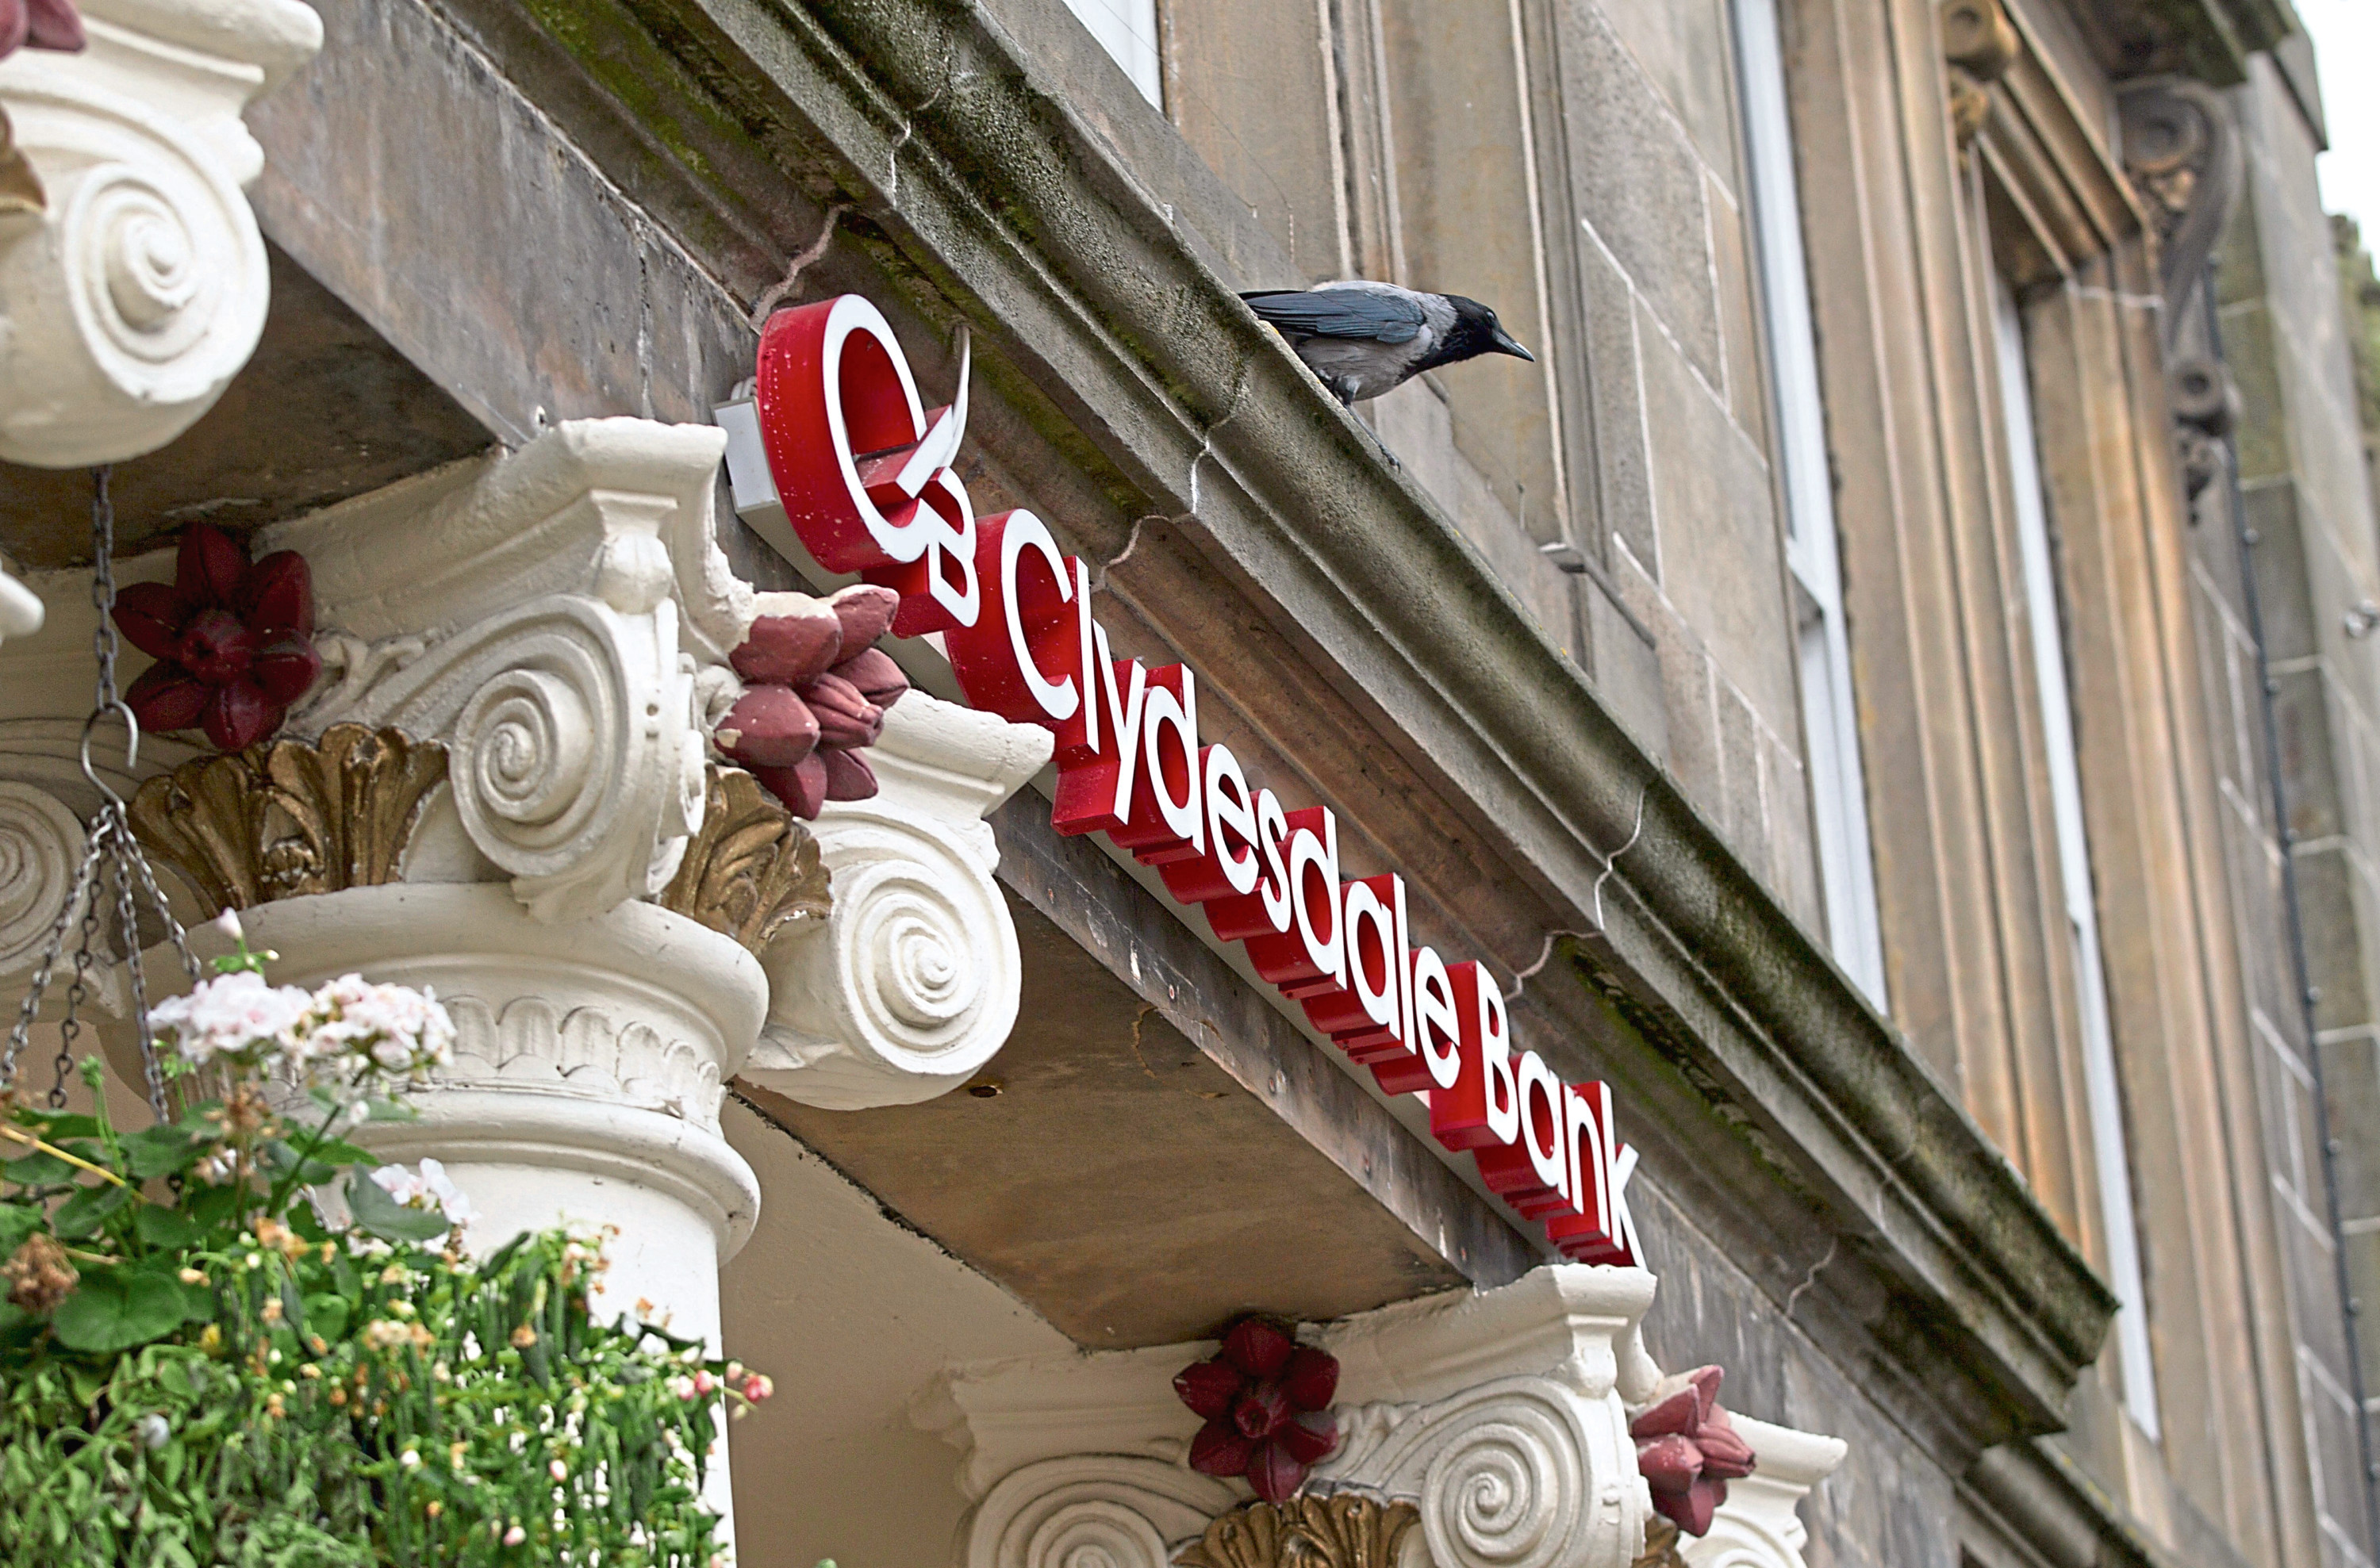 Clydesdale Bank announced plans to close the branches in February.